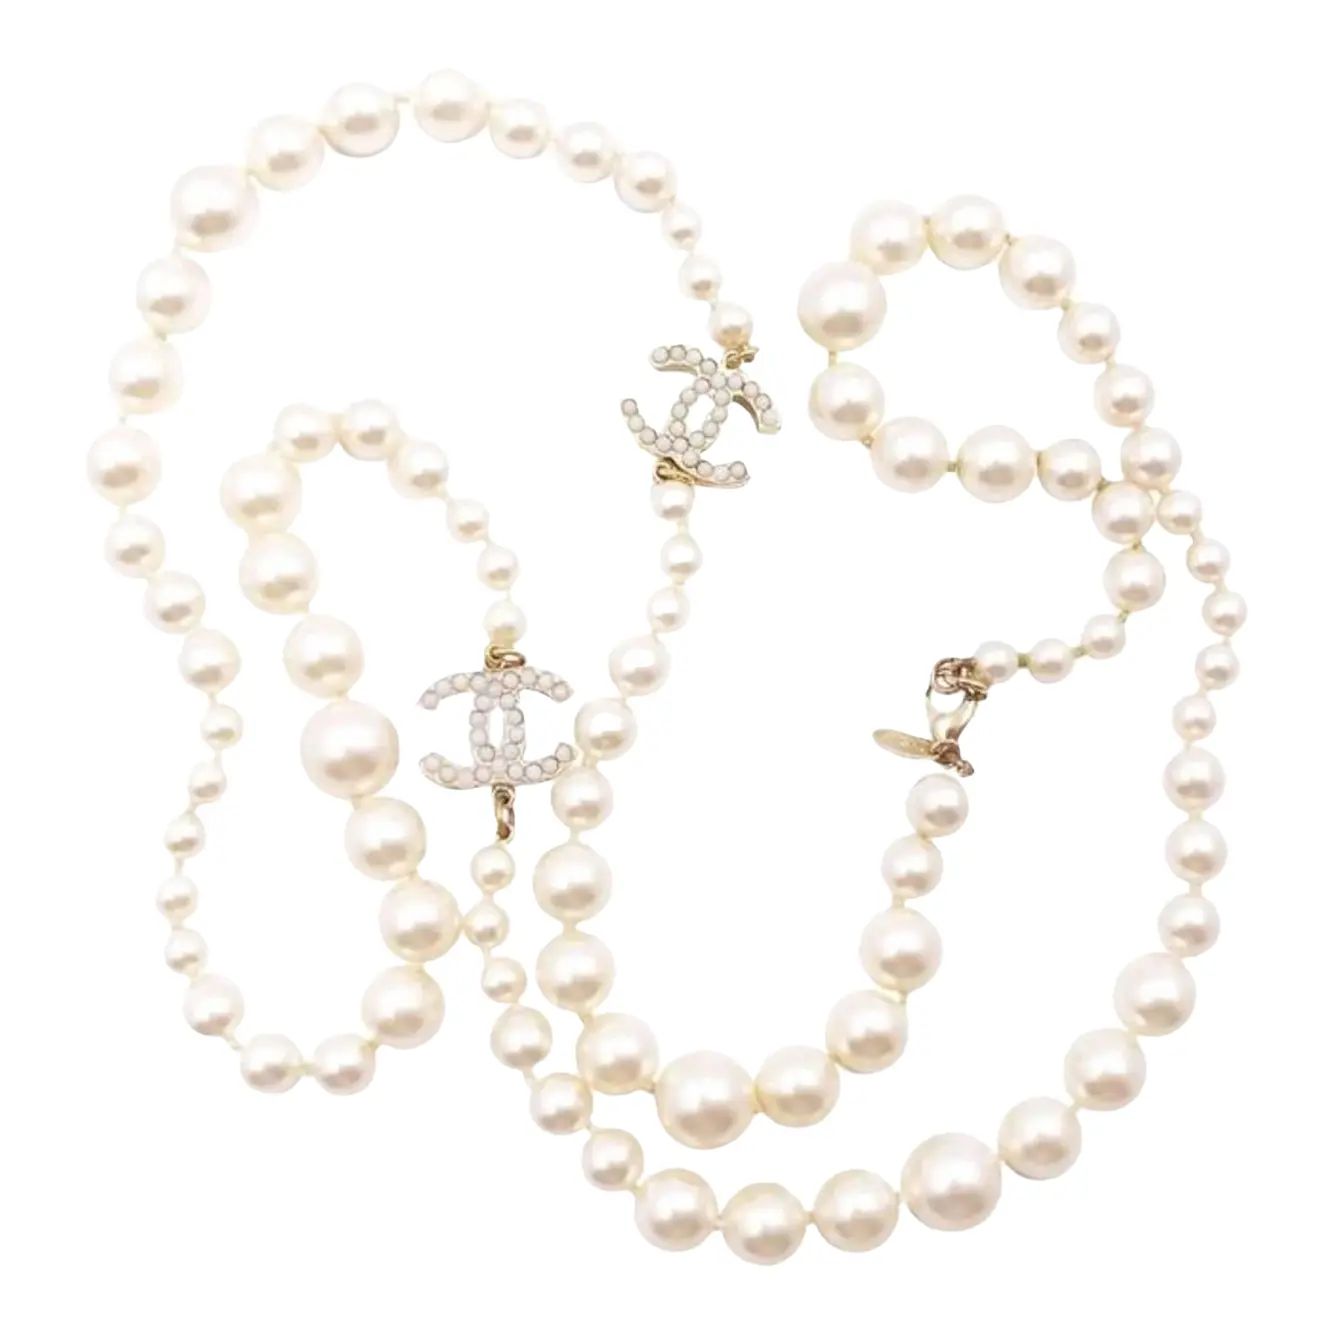 Chanel 2 Gold CC White Bead Pearl Necklace | Chairish